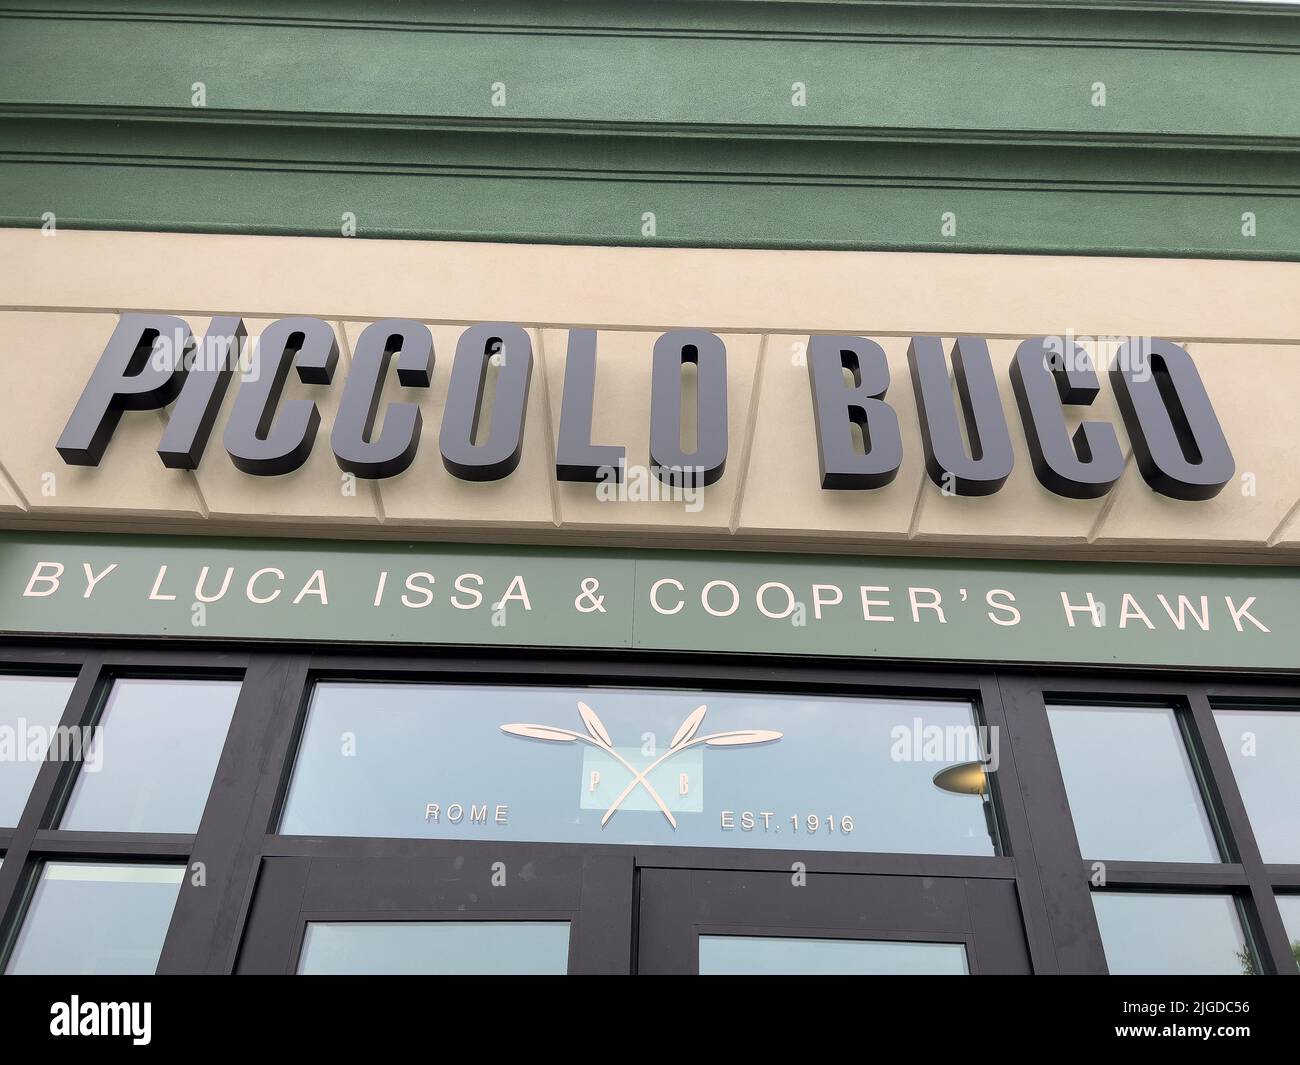 Piccolo Buco is an Italian restaurant and winery created by Luca Issa and Cooper's Hawk, inspired by the restaurant in Rome, Italy. Stock Photo